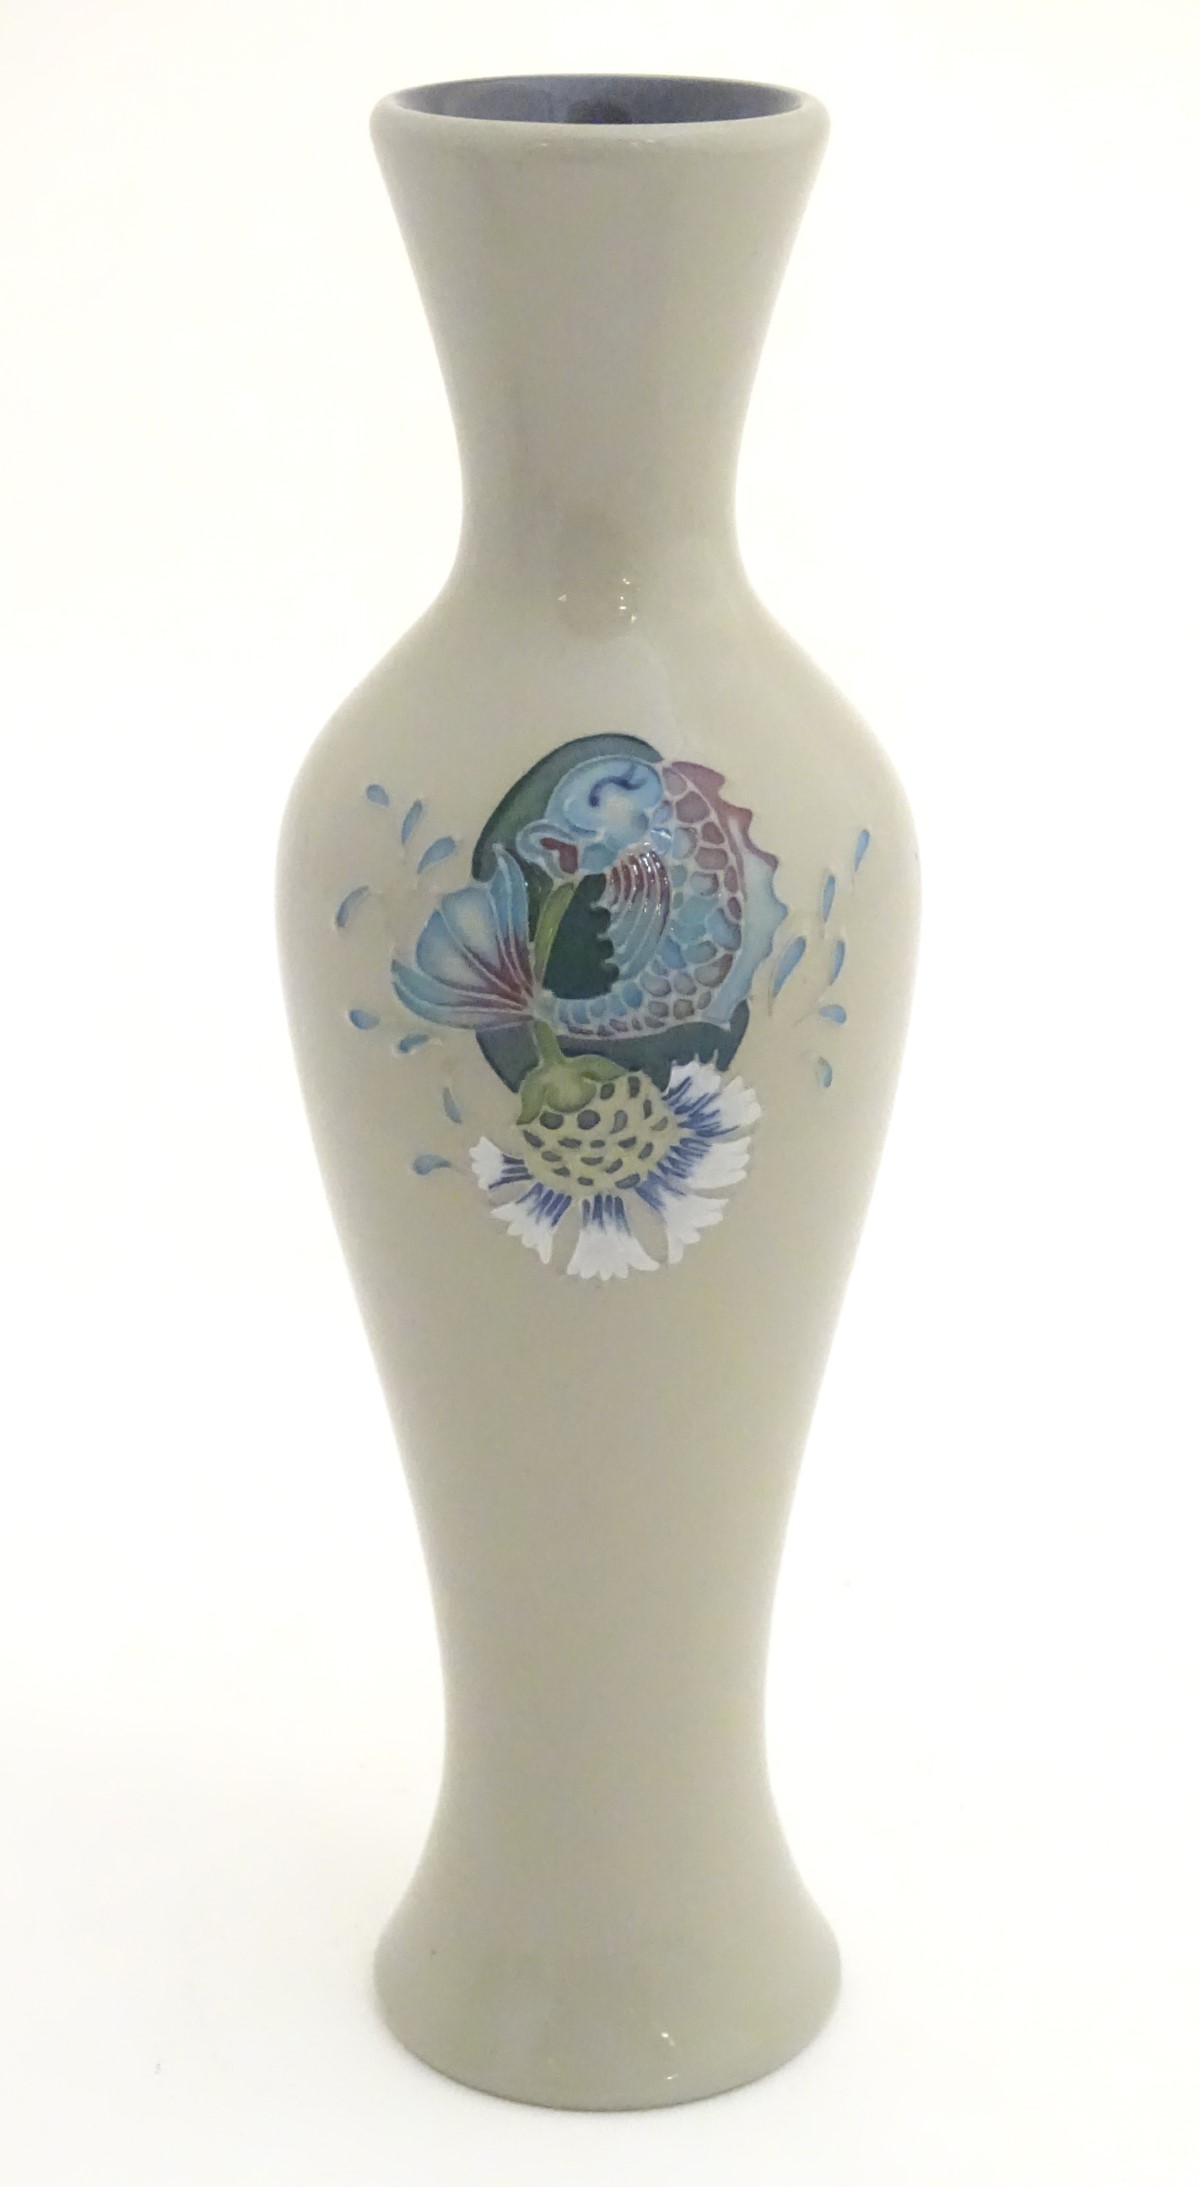 A Moorcroft vase in the shape no. 93/12 decorated with a fish and thistle design.